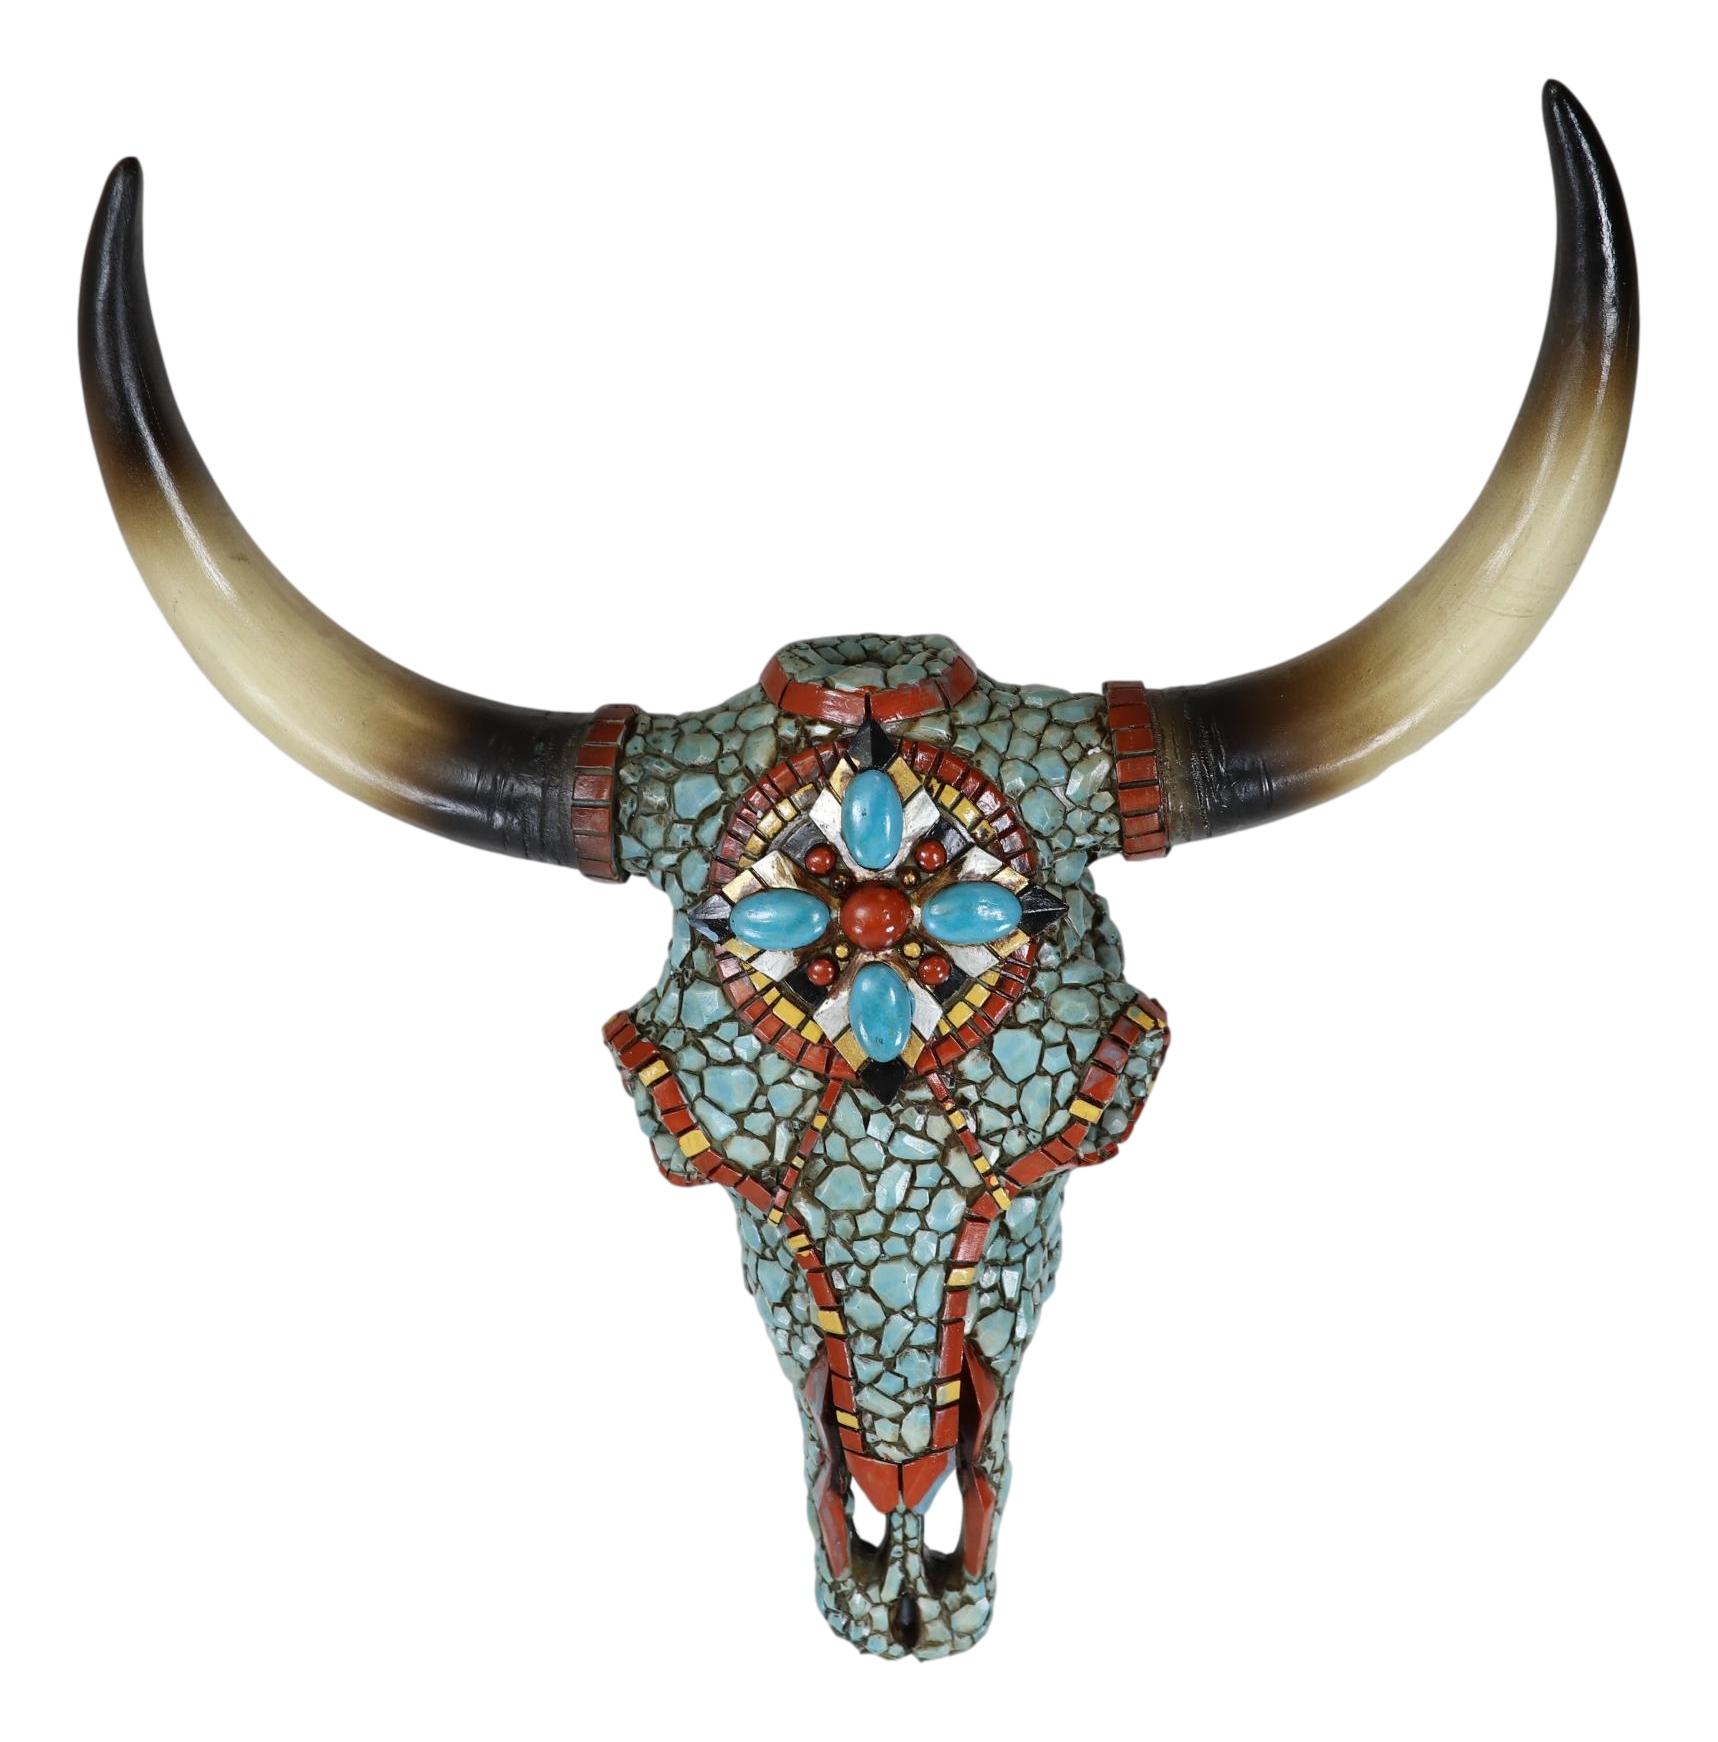 Large Western Steer Cow Skull With Mosaic Turquoise Stones And Beads Wall Decor - image 3 of 6